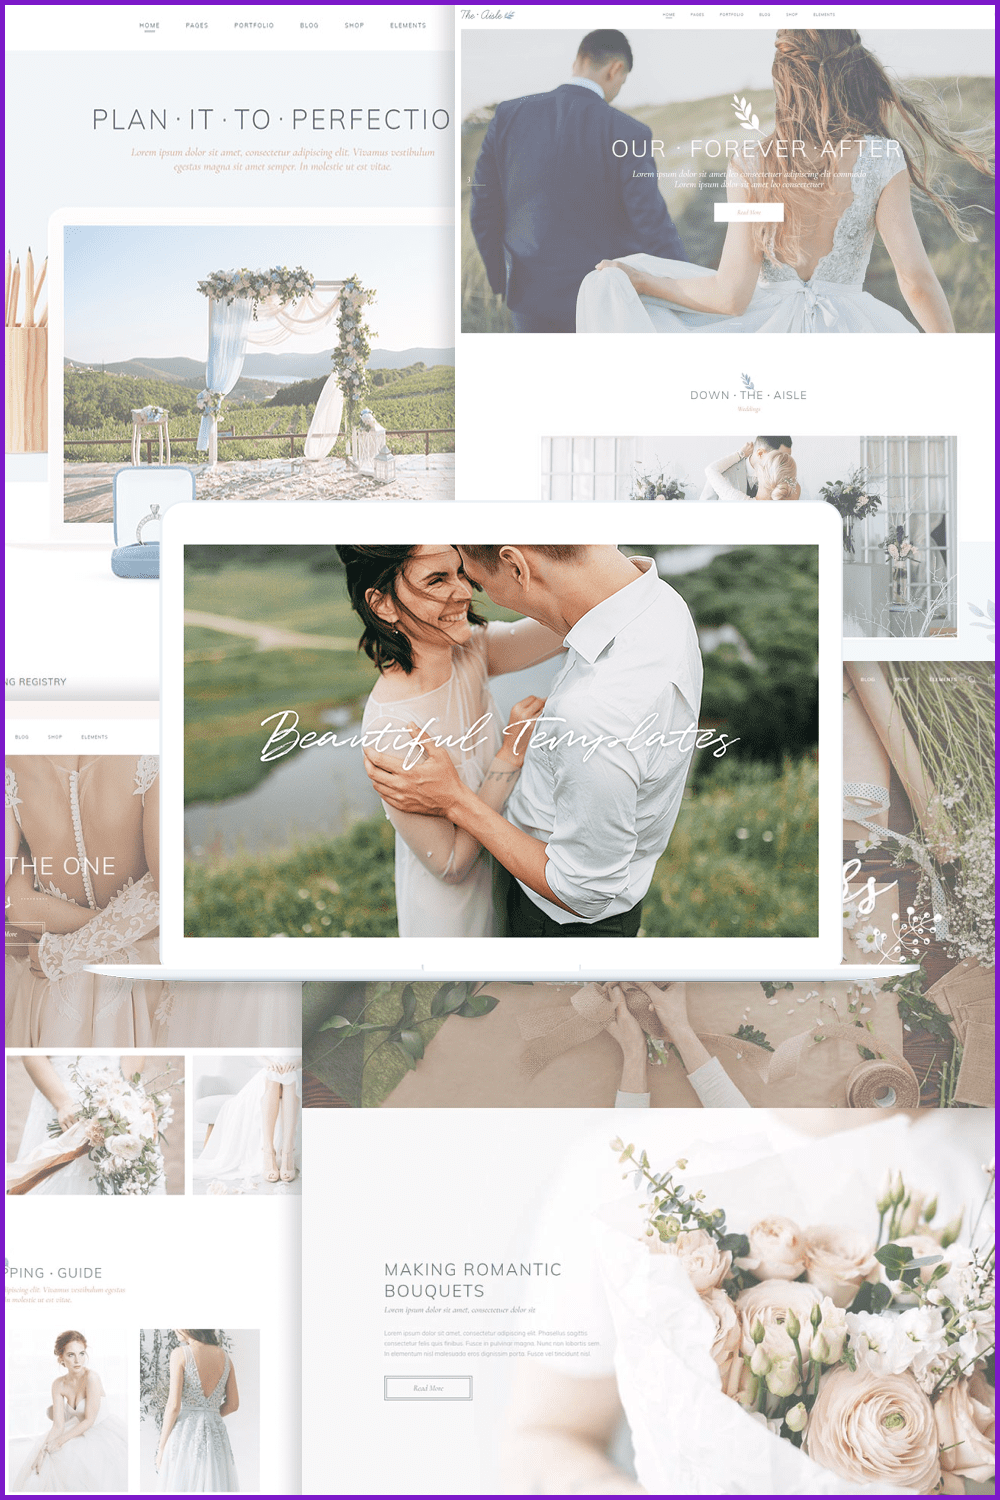 Collage of website pages with photos of newlyweds, wedding arch and bouquets.